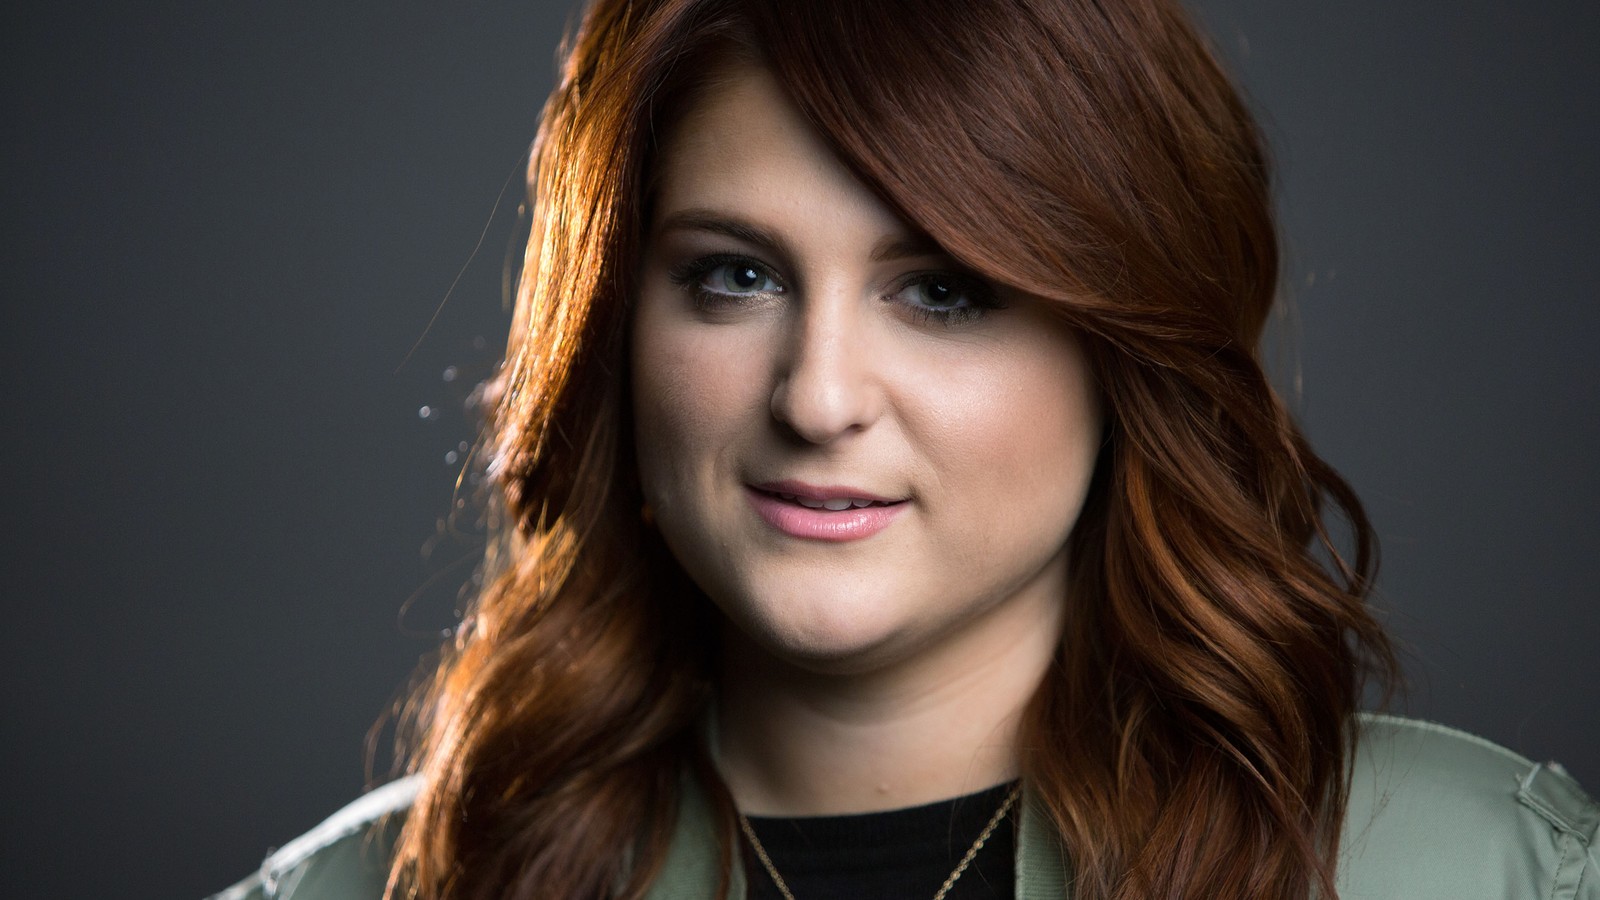 Made You Look by Meghan Trainor - Song Meanings and Facts